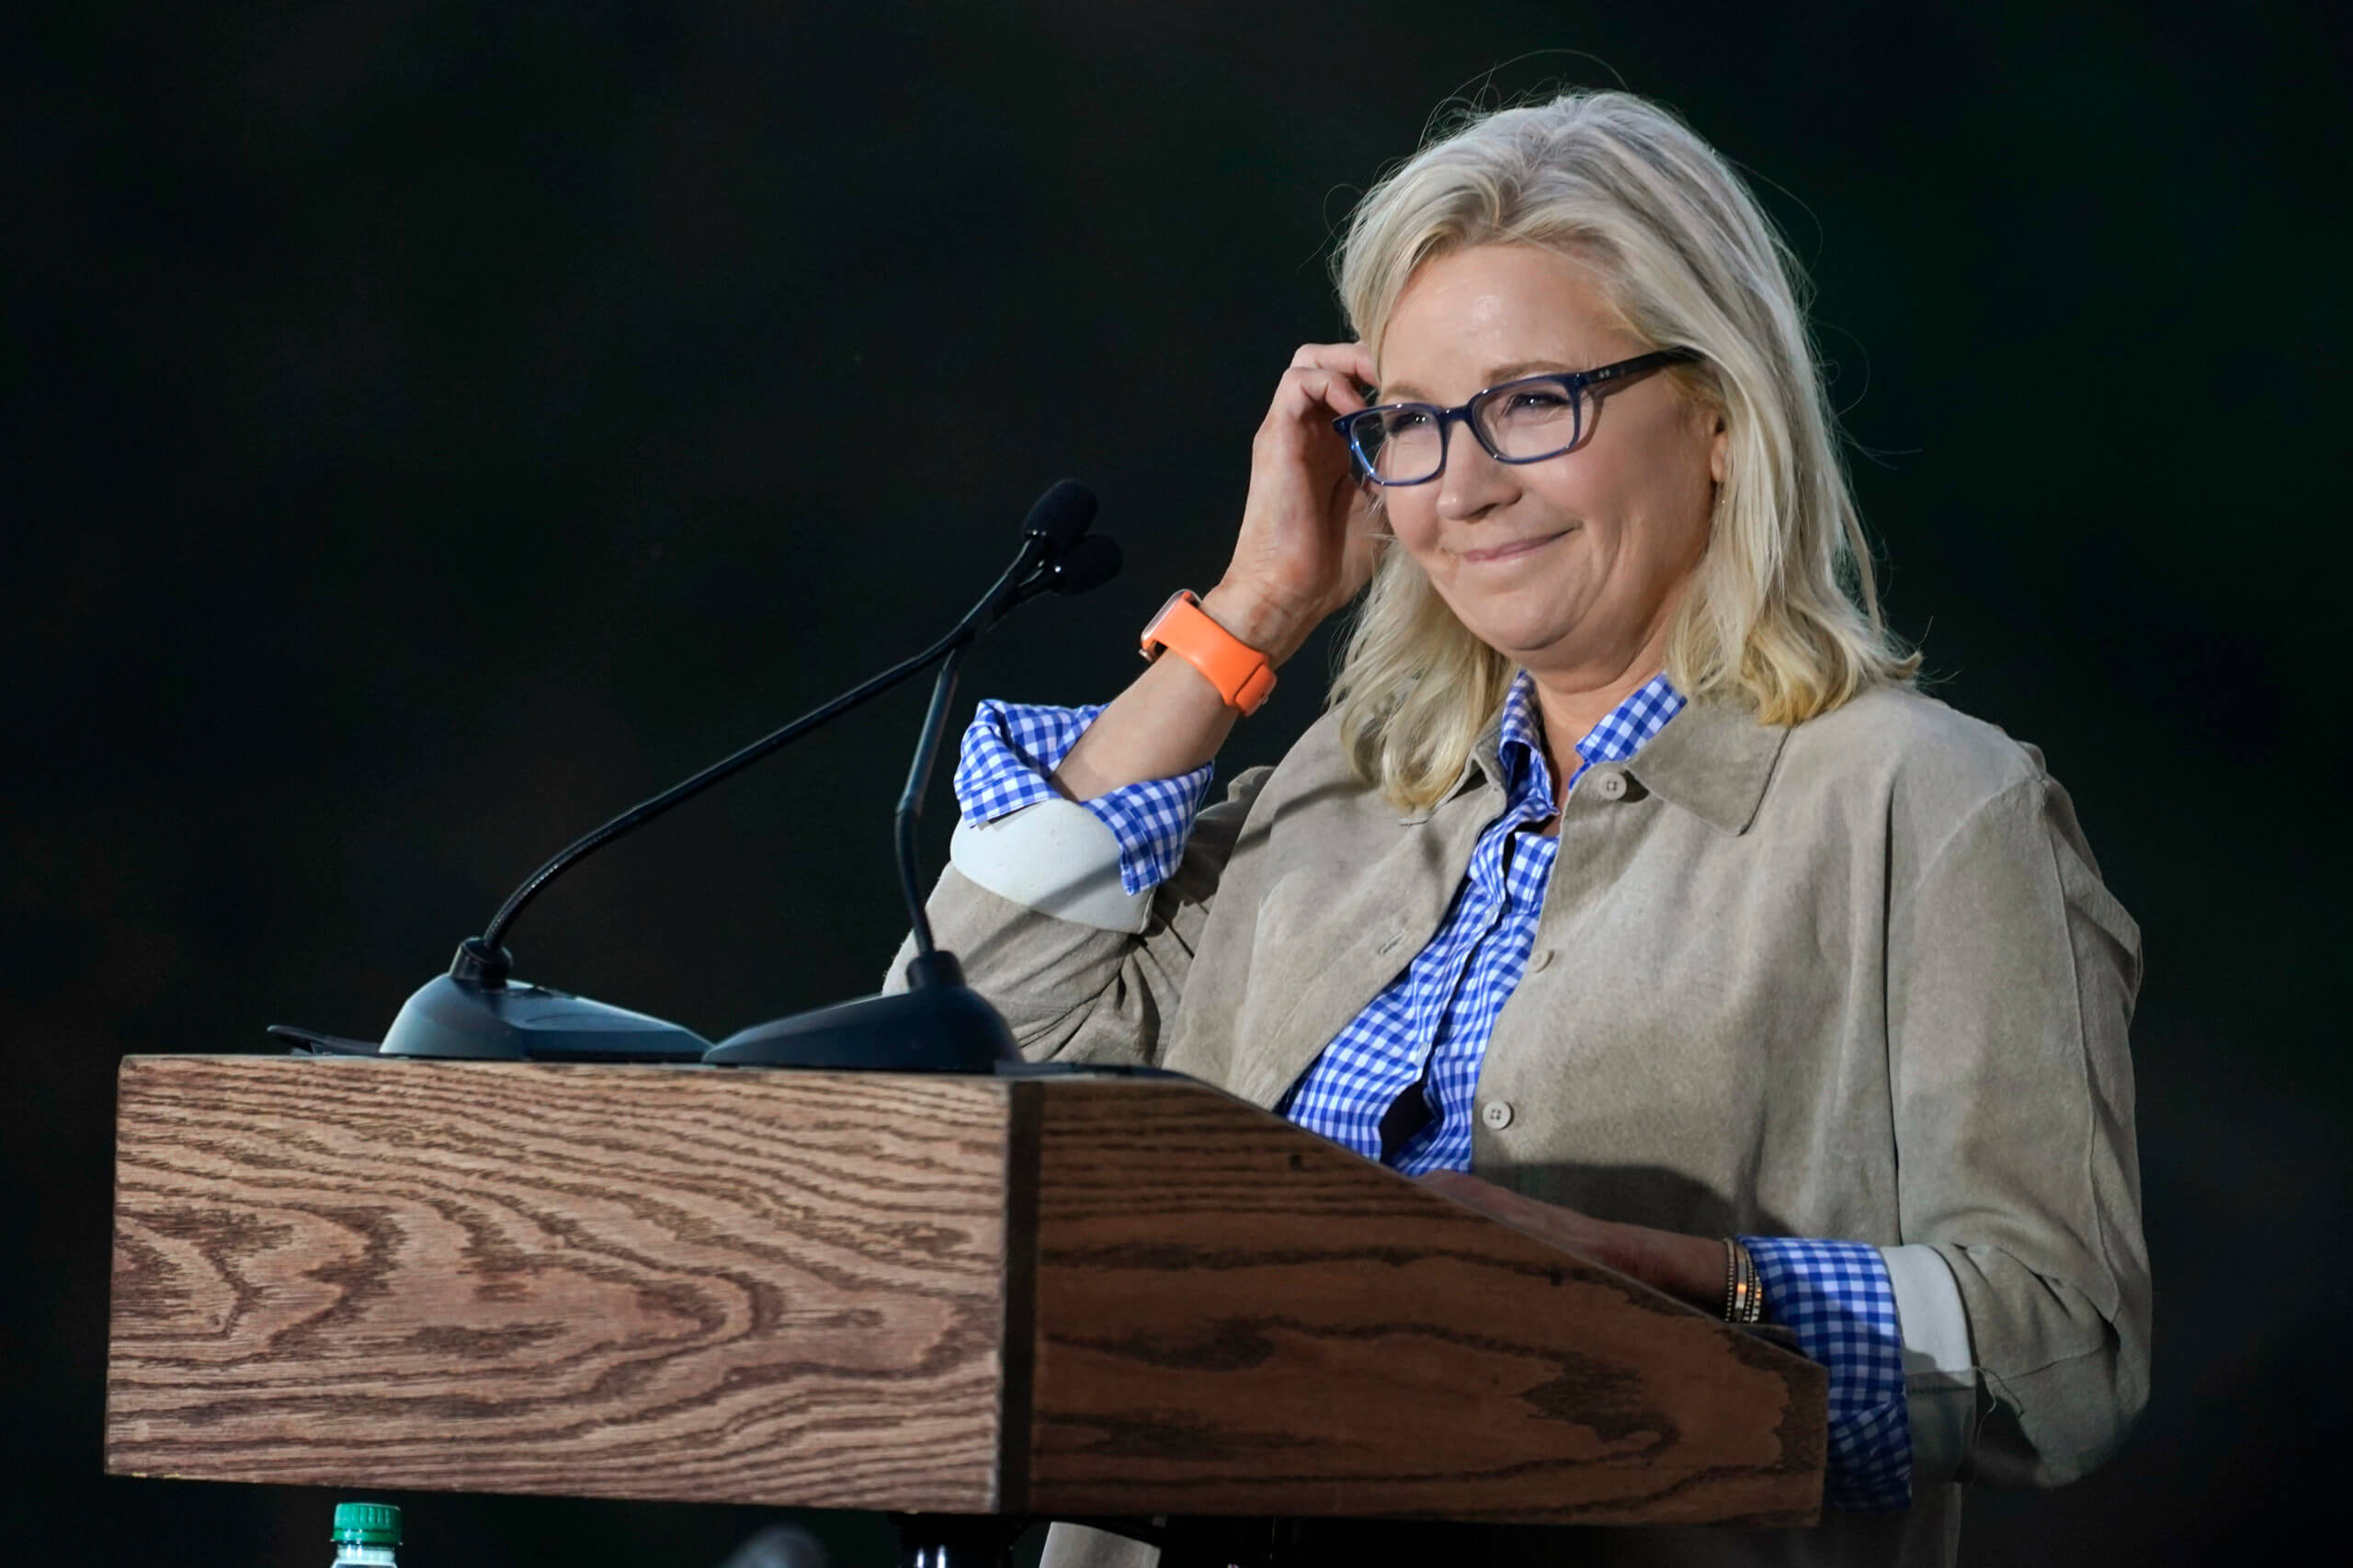 Rep. Liz Cheney, R-Wyo., pauses as she speaks Tuesday, Aug. 16, 2022, at an Election Day gathering in Jackson, Wyo. Cheney lost to Republican opponent Harriet Hageman in the primary. (AP Photo/Jae C. Hong)